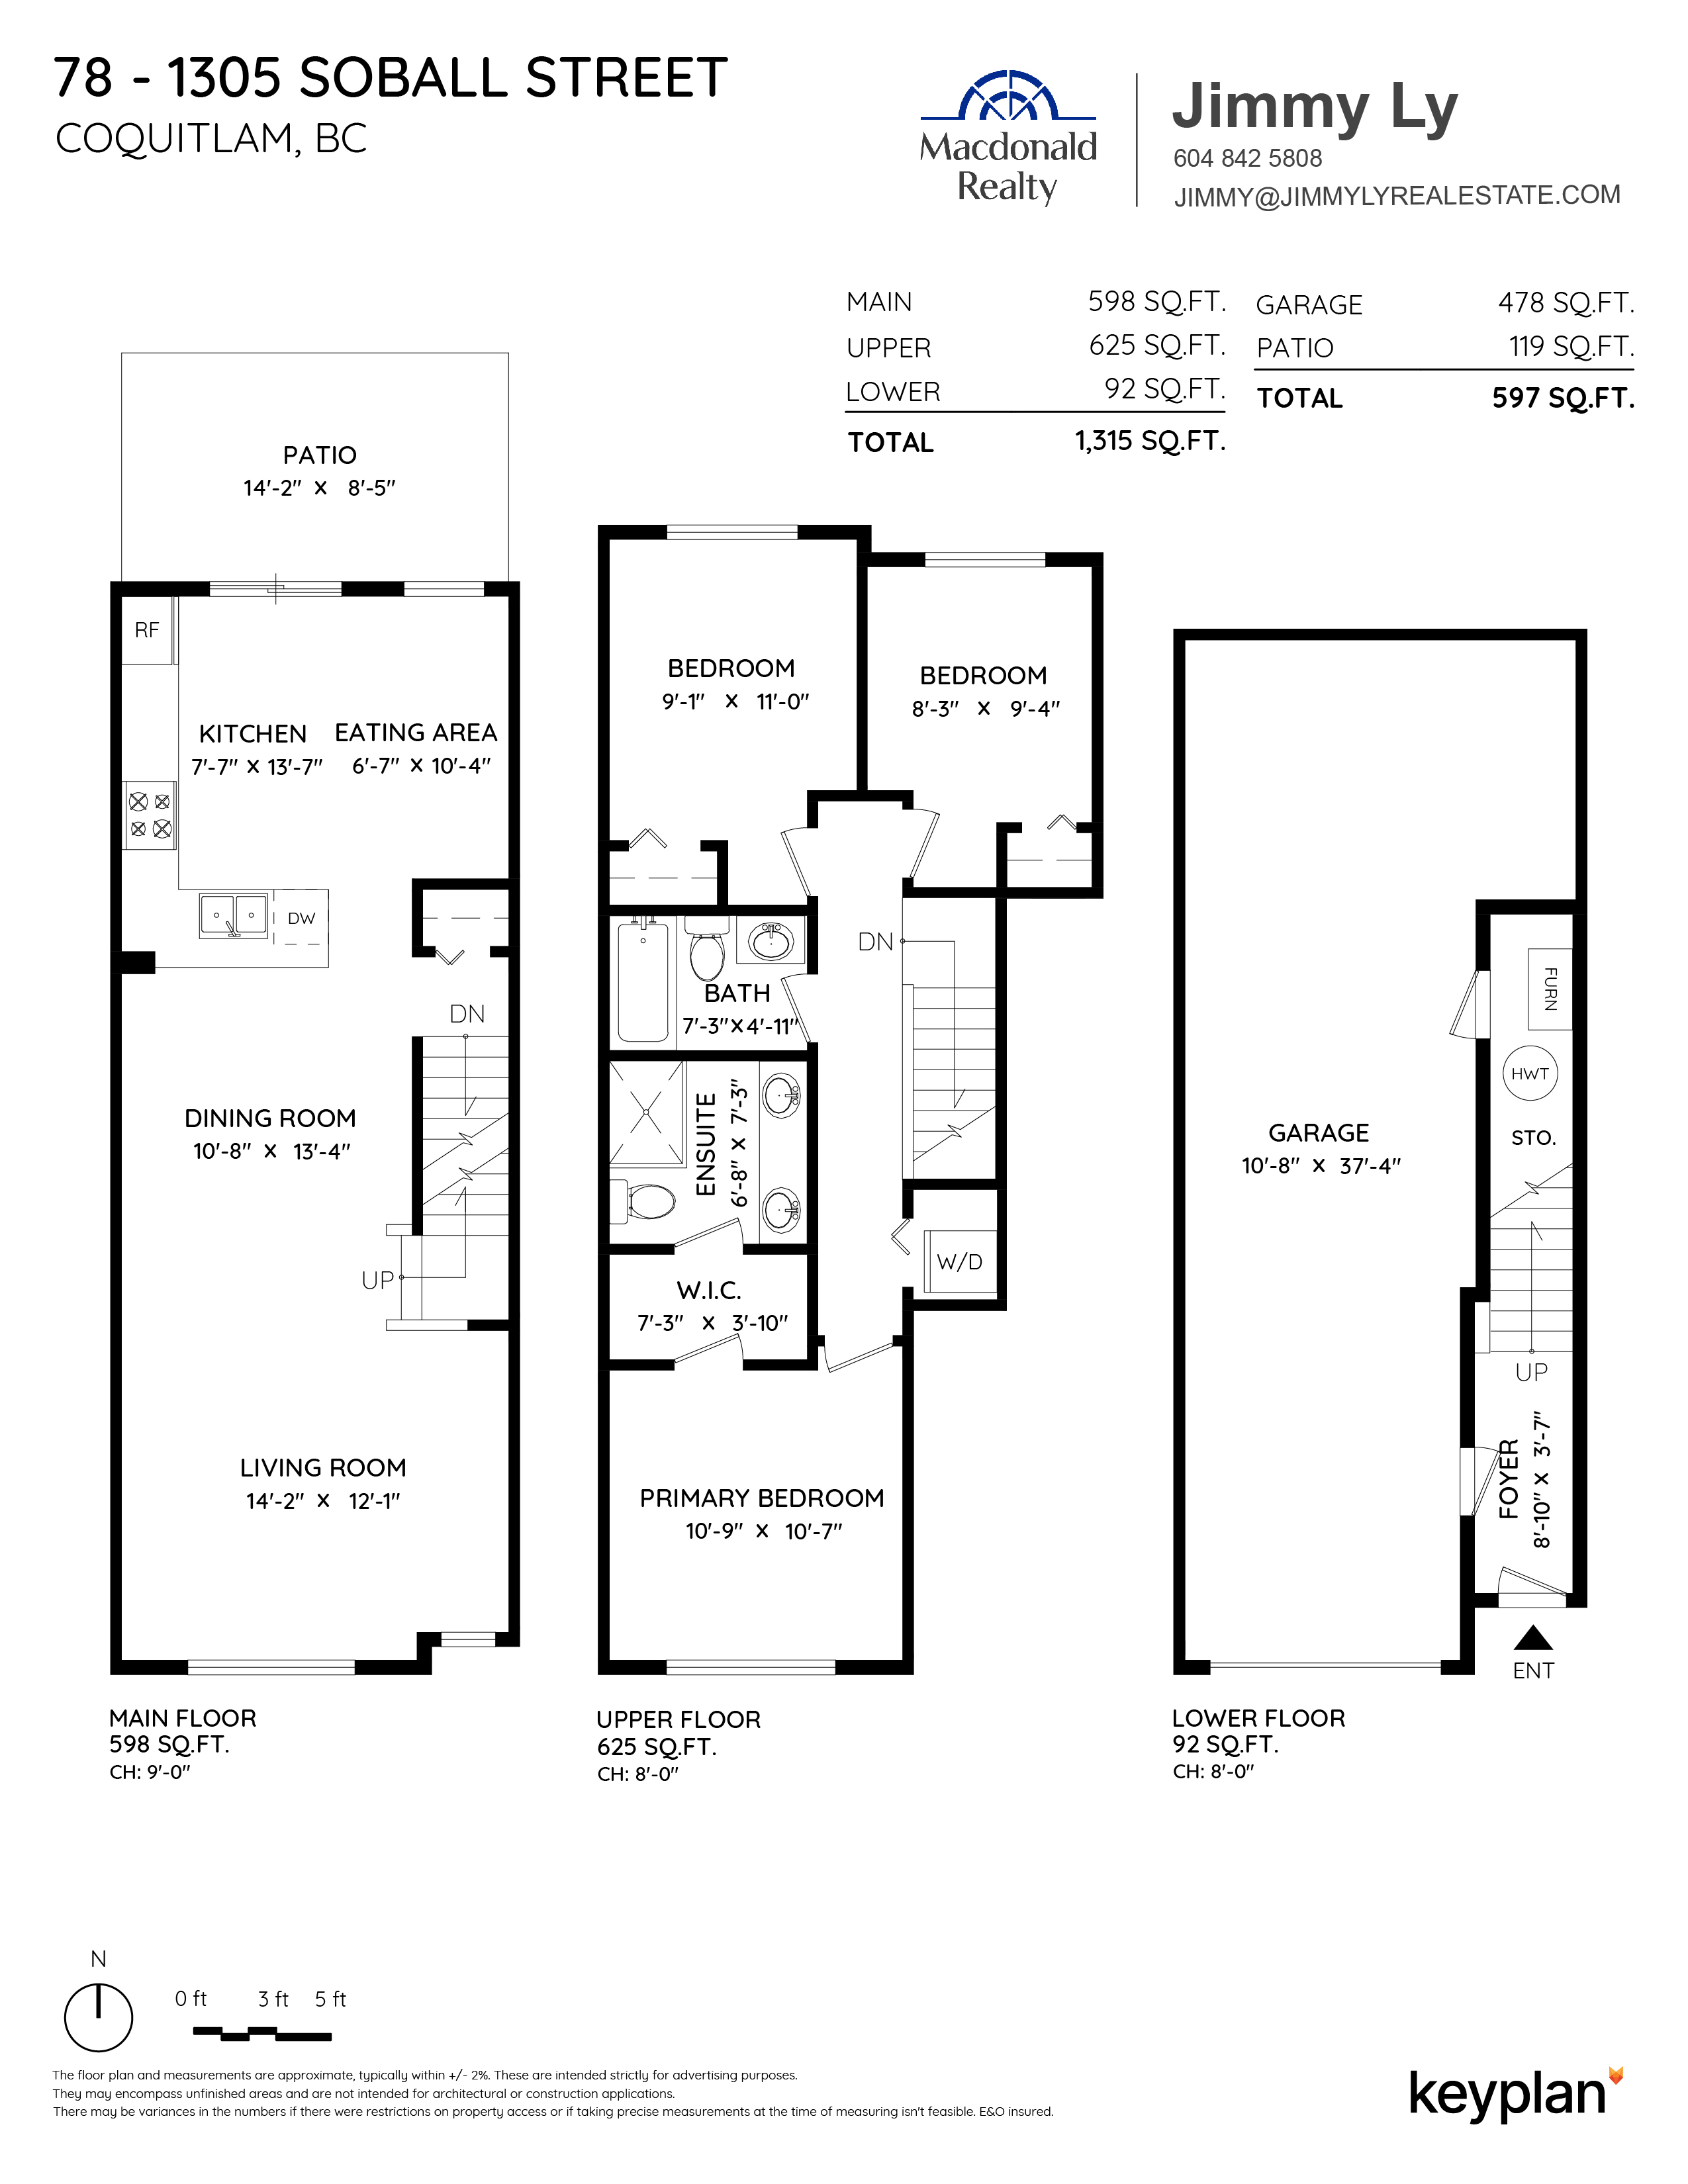 Jimmy Ly - Unit 78 - 1305 Soball Street, Coquitlam, BC, Canada | Floor Plan 1